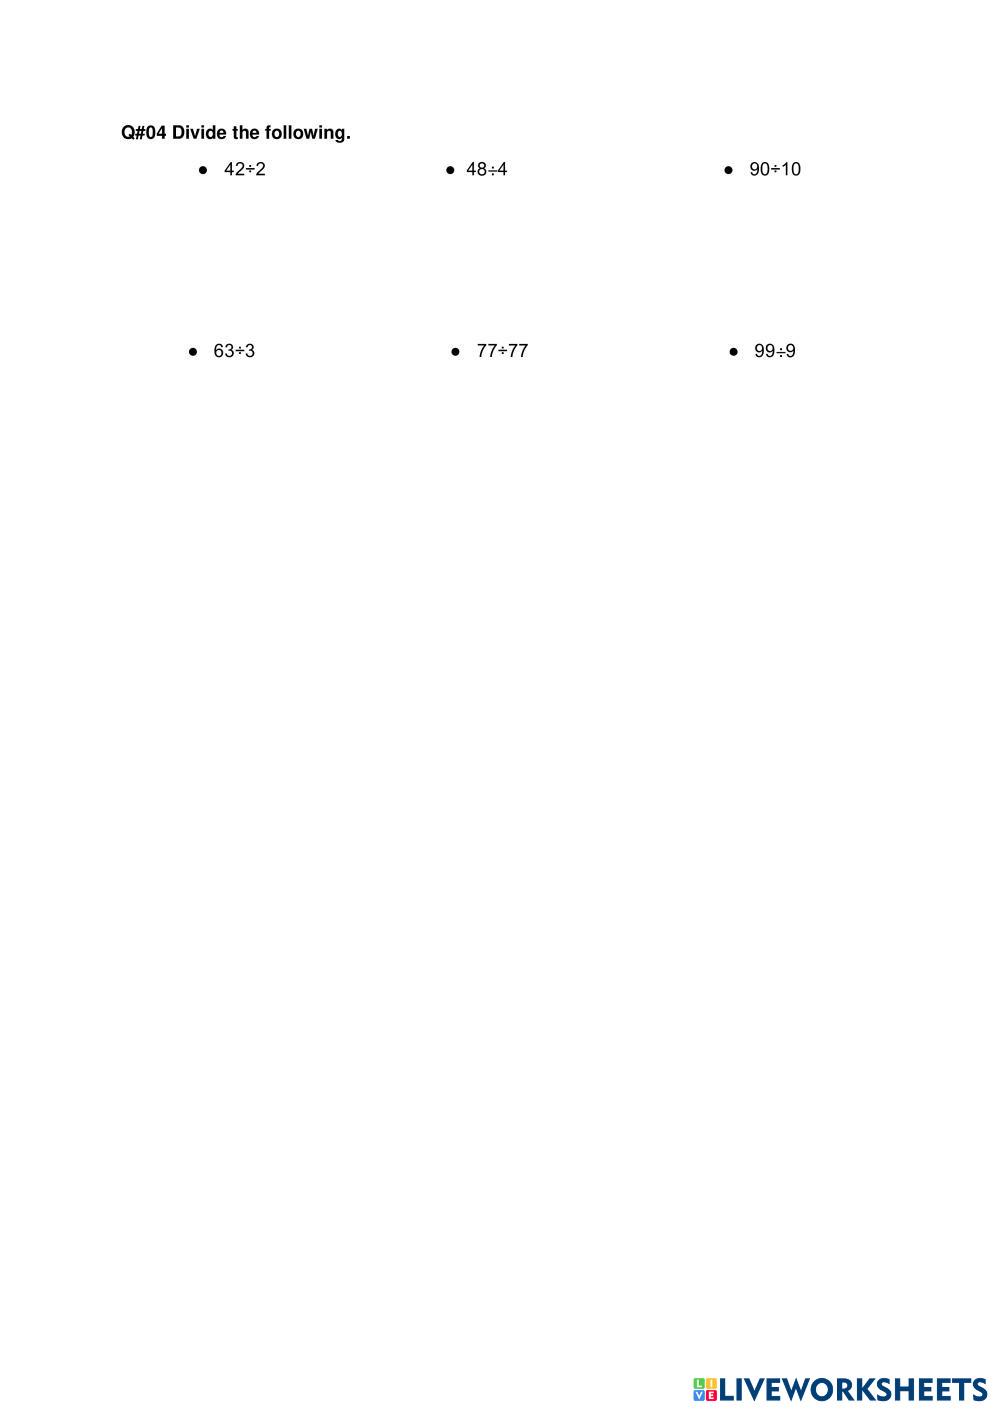 addition-subtraction-multiplication-and-division-live-worksheets